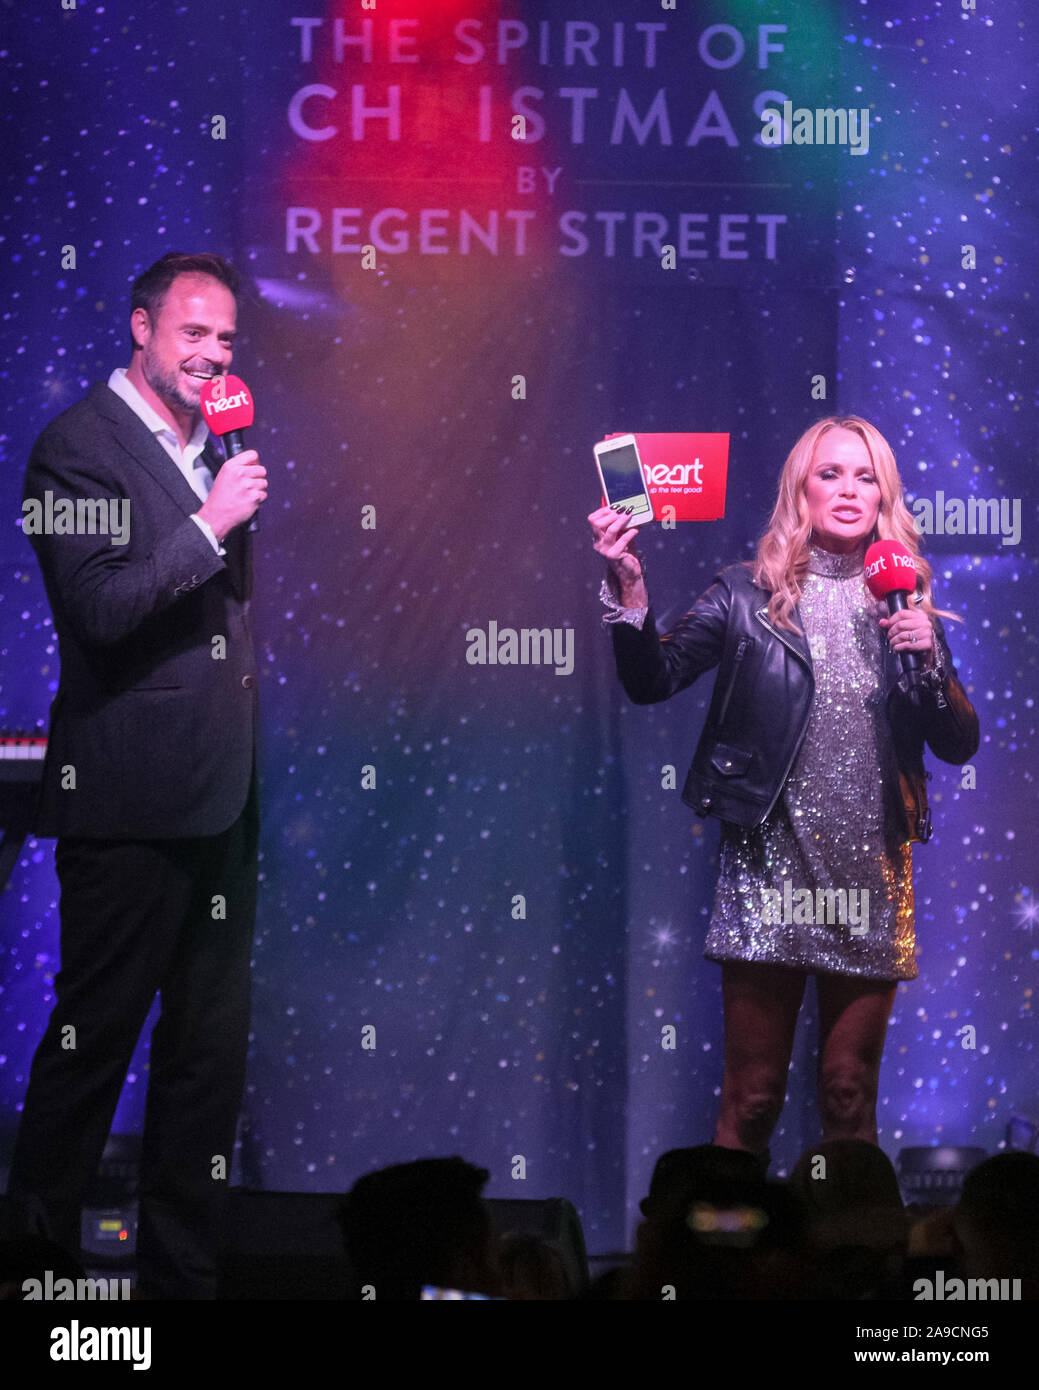 Regent Street, London, UK. 14th Nov, 2019. Heart FM presenters Jamie Theakston and Amanda Holden.The largest Christmas Light installation in London, Regent Street's 'The Spirit of Christmas', featuring illuminated angels spreading their wings, is switched on with a program of stage appearances, performers, festive activities, food and drink. Credit: Imageplotter/Alamy Live News Stock Photo